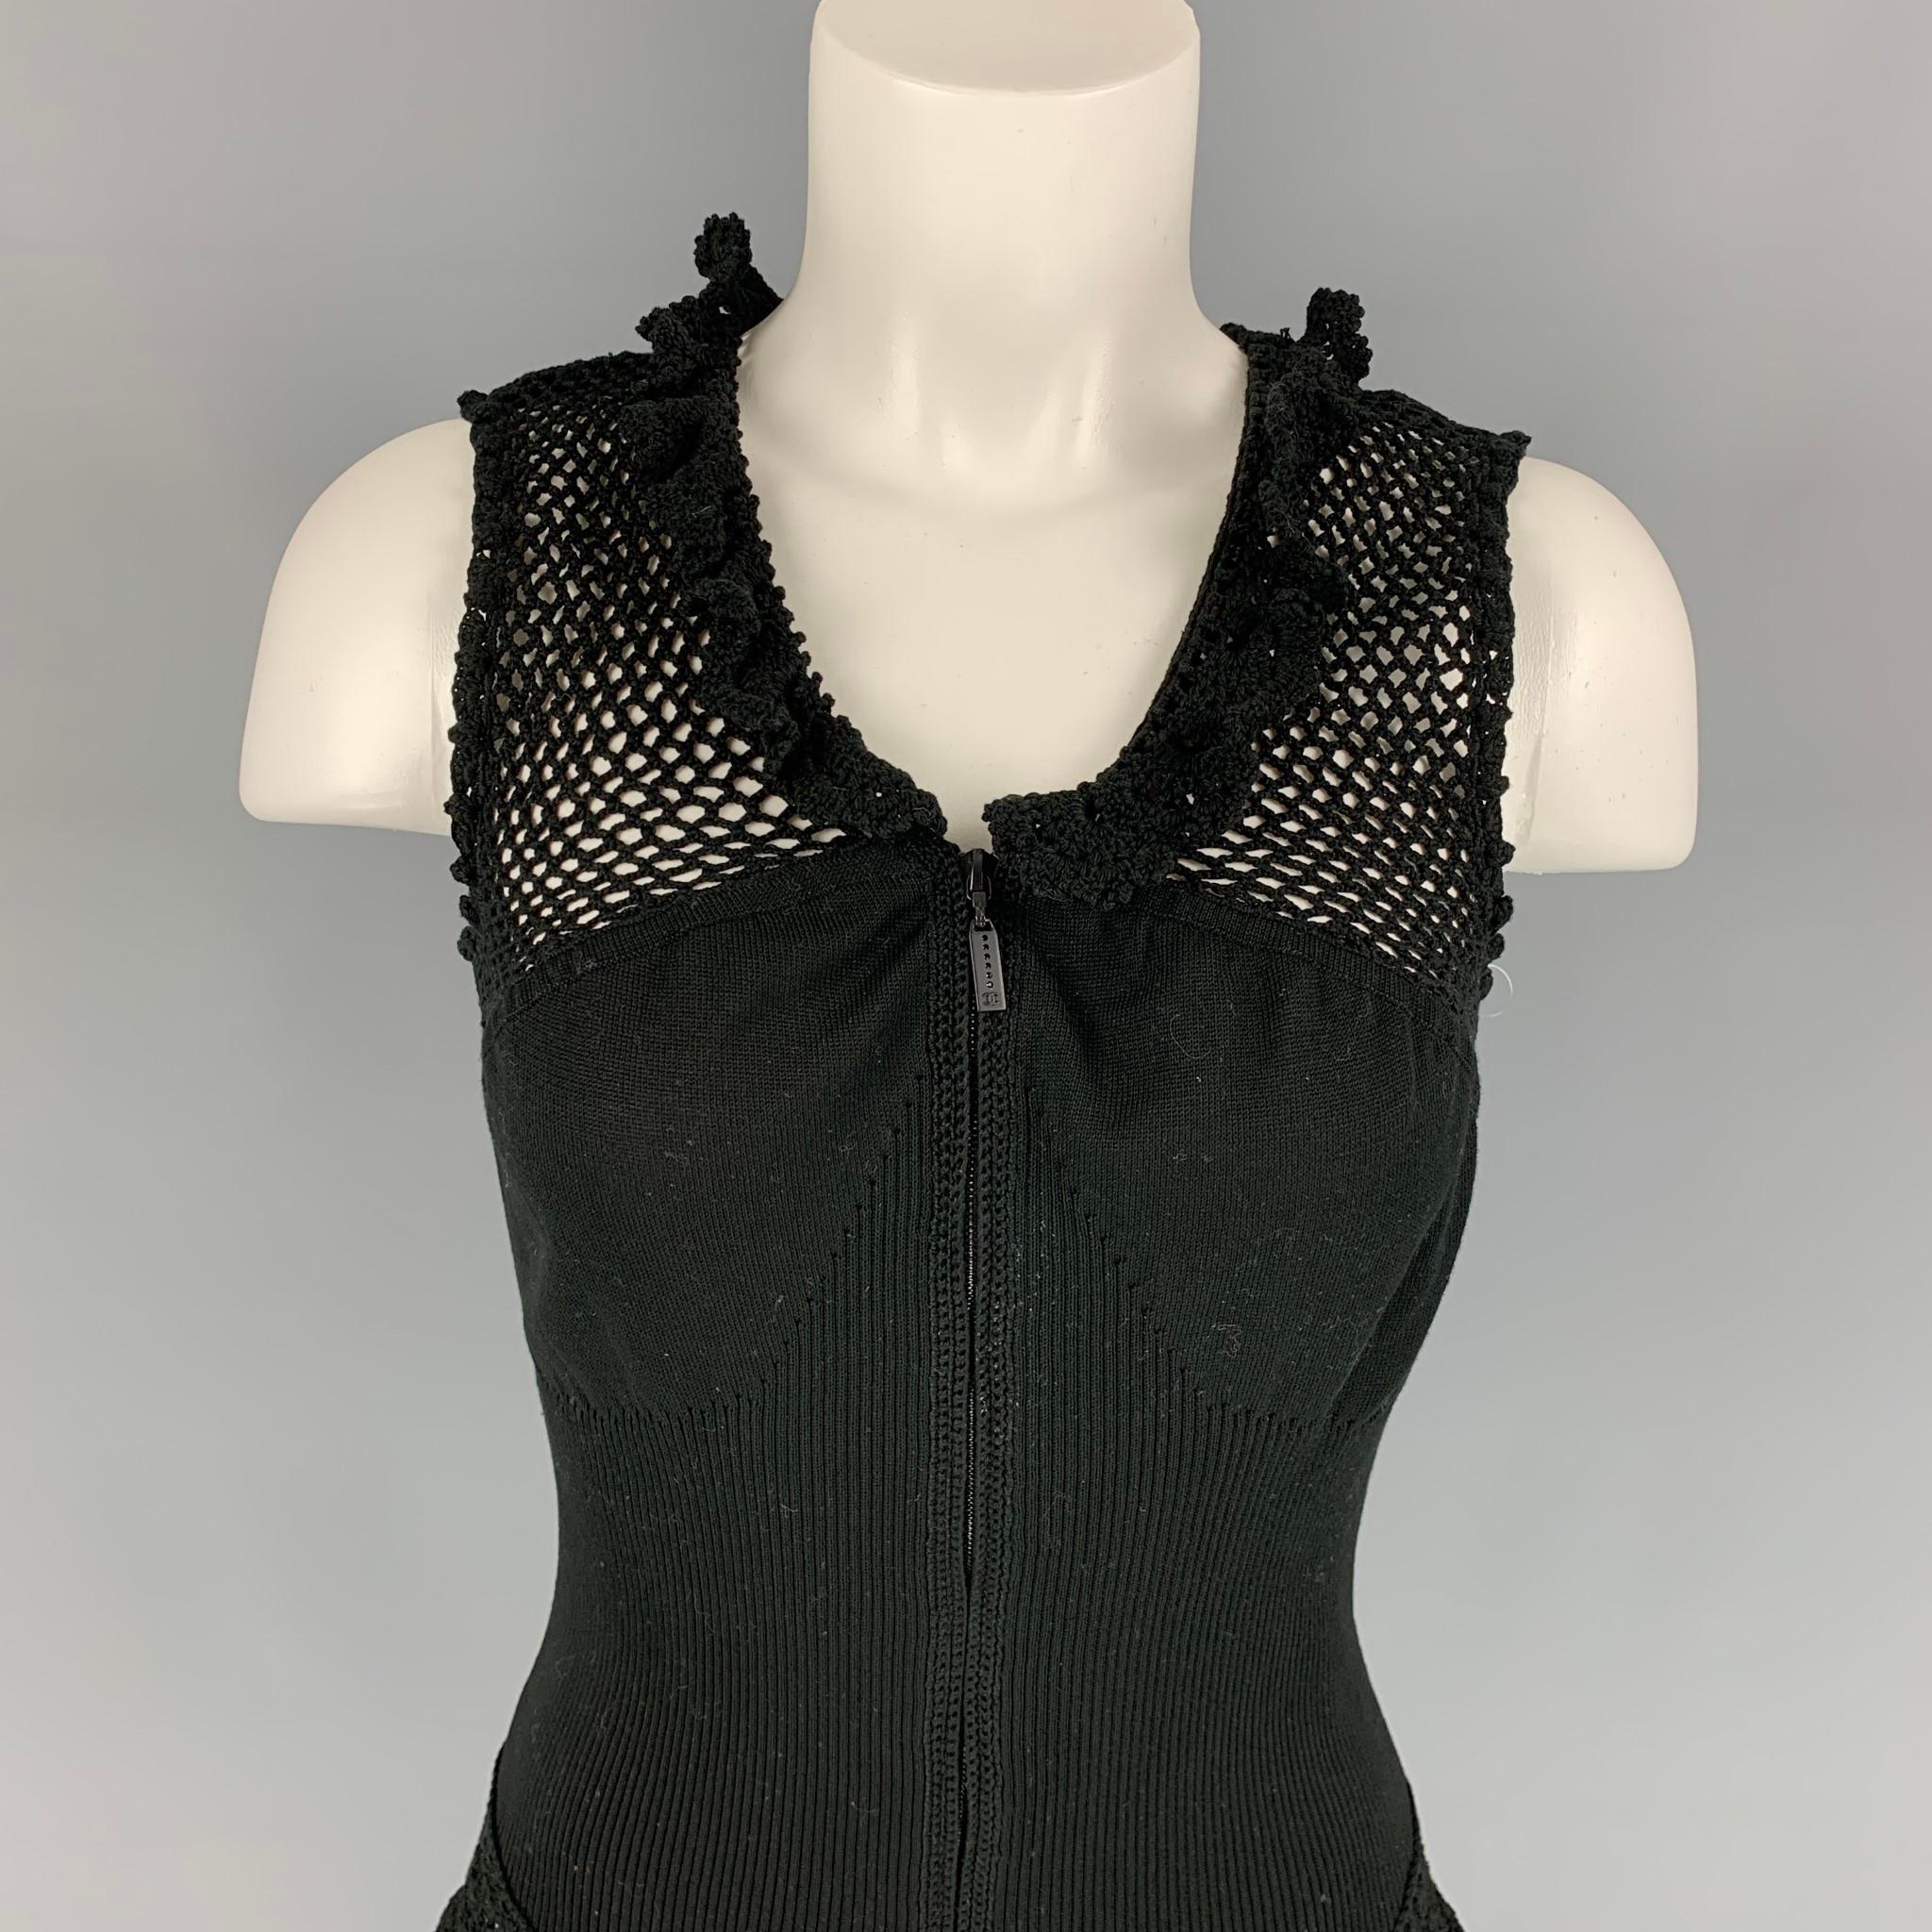 CHANEL blouse comes in a black crochet cotton featuring a ruffles collar, sleeveless, and a front zip up closure. Made in Italy. 

Very Good Pre-Owned Condition.
Marked: 40

Measurements:

Shoulder: 12 in.
Bust: 26 in.
Length: 21 in. 